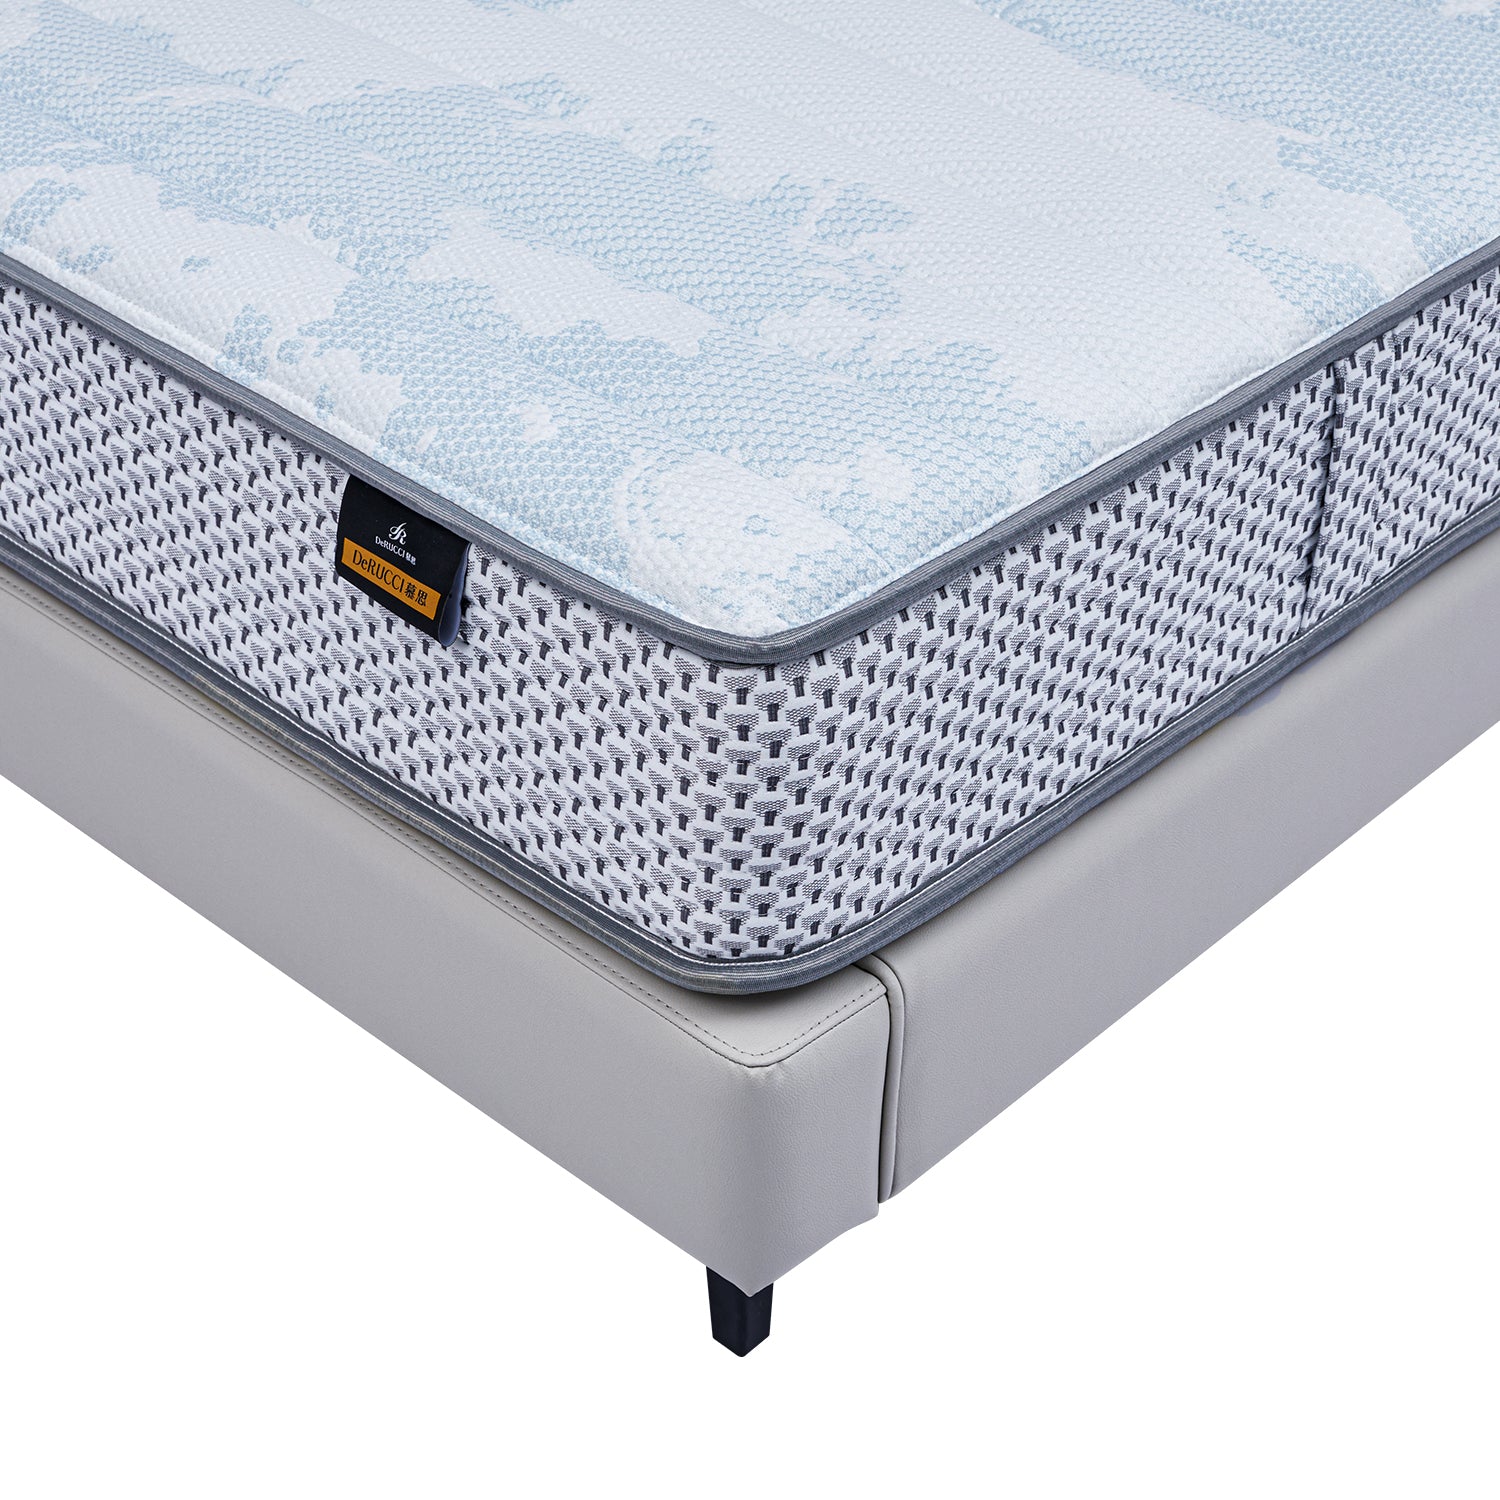 Close-up of DeRUCCI bed frame BOC1 - 012 with high-quality mattress and white leather finish